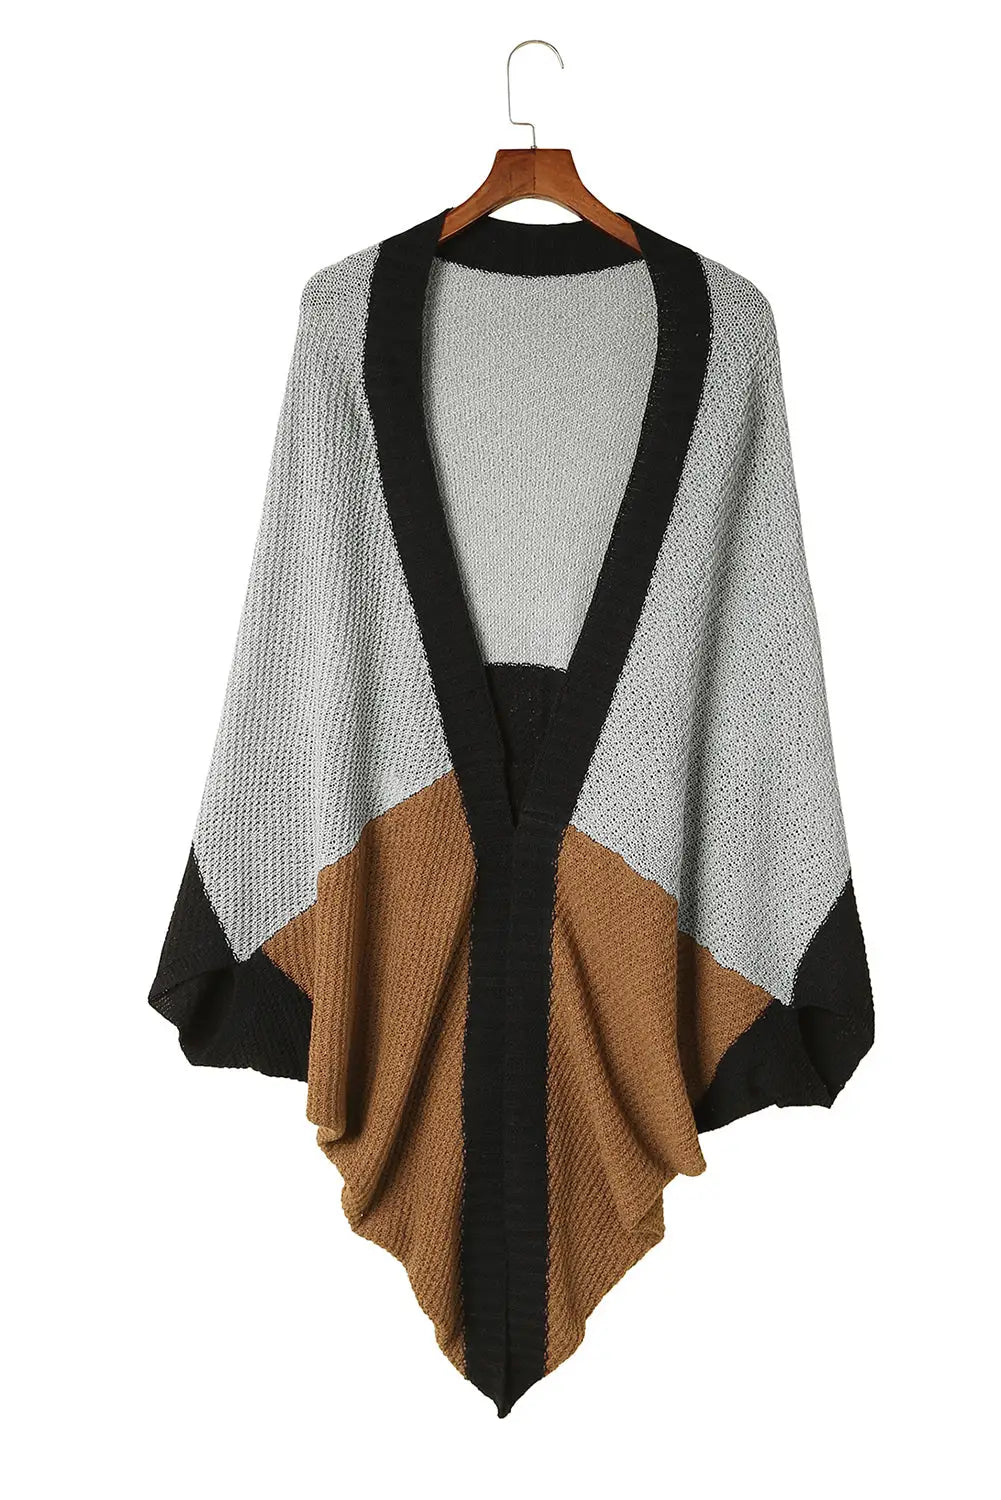 Gray neutral colorblock drapey cardigan - one size / 100% polyester - tops